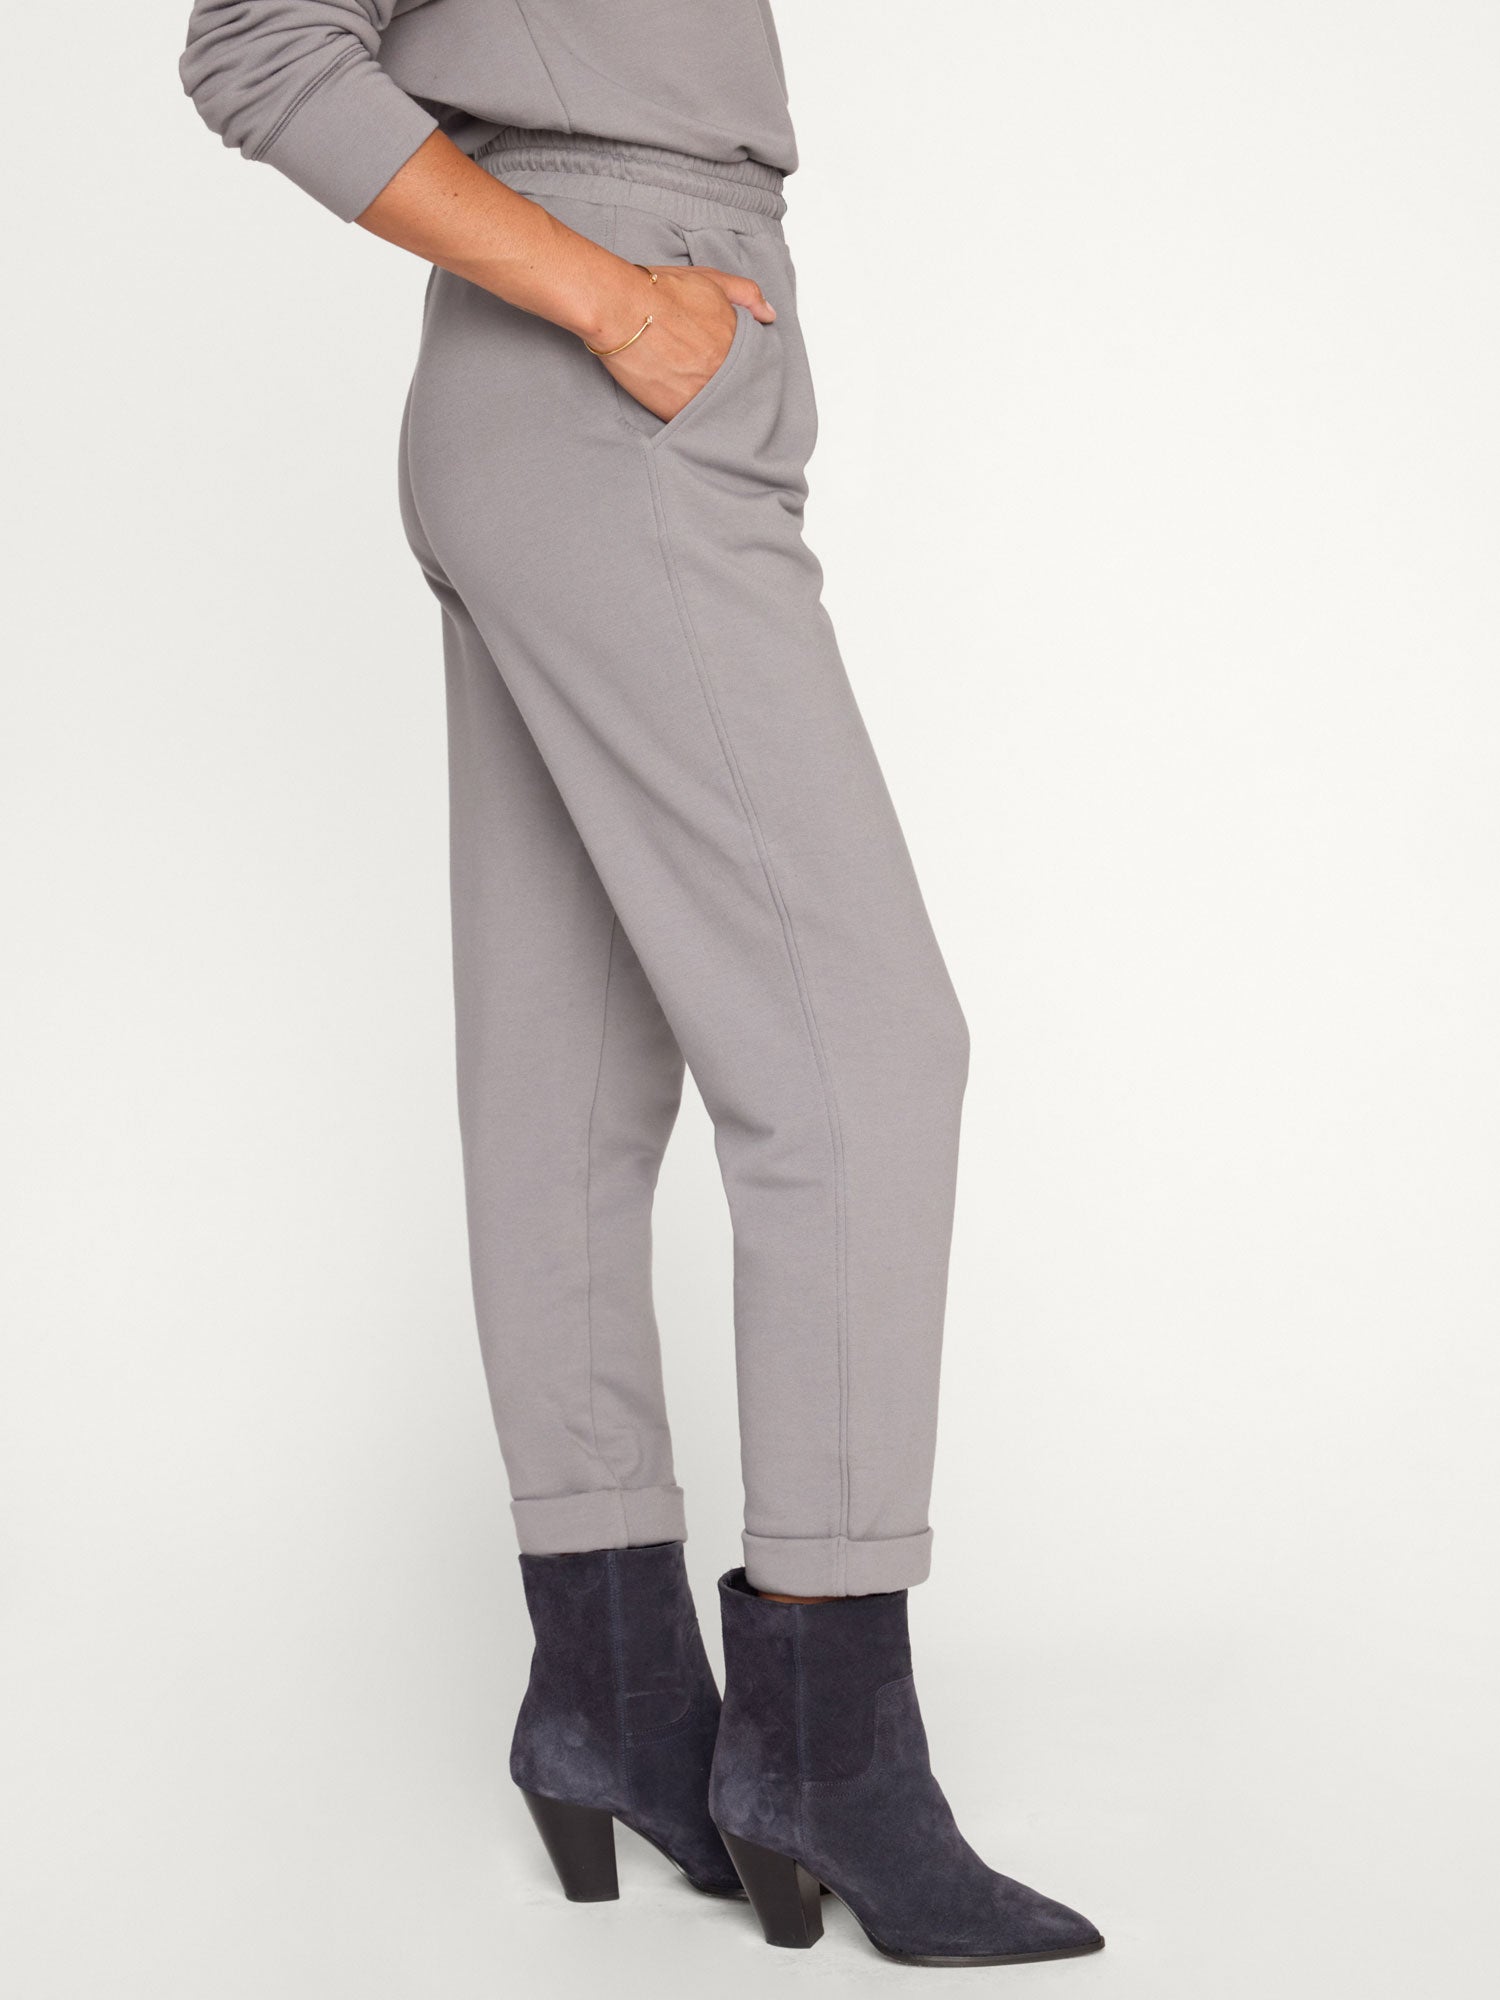 Penn French Terry grey ankle pant side view